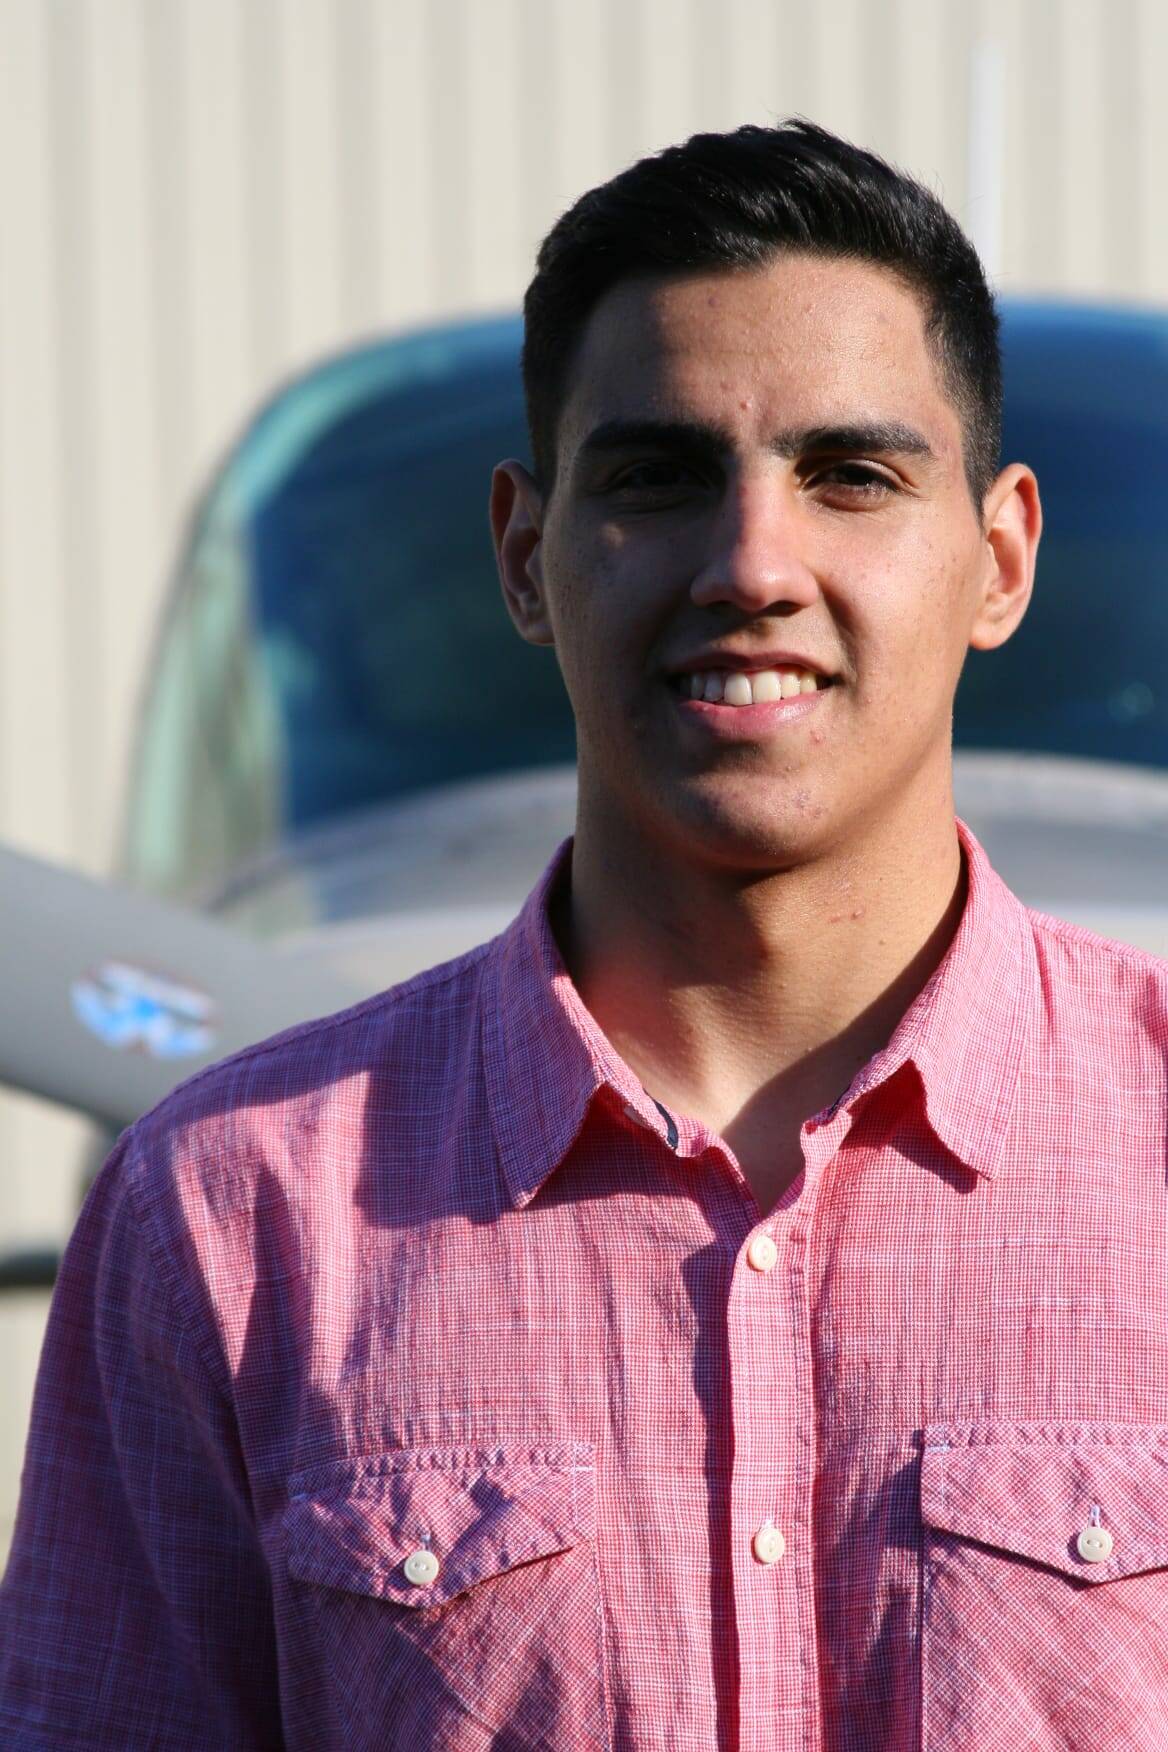 Contributed photo
Late this summer, Diego Garcia, who just graduated from the Orcas Christian School, flew the Airhawks Flying Club aircraft to Bellingham for his Private Pilot check flight and oral exam with an FAA Examiner.